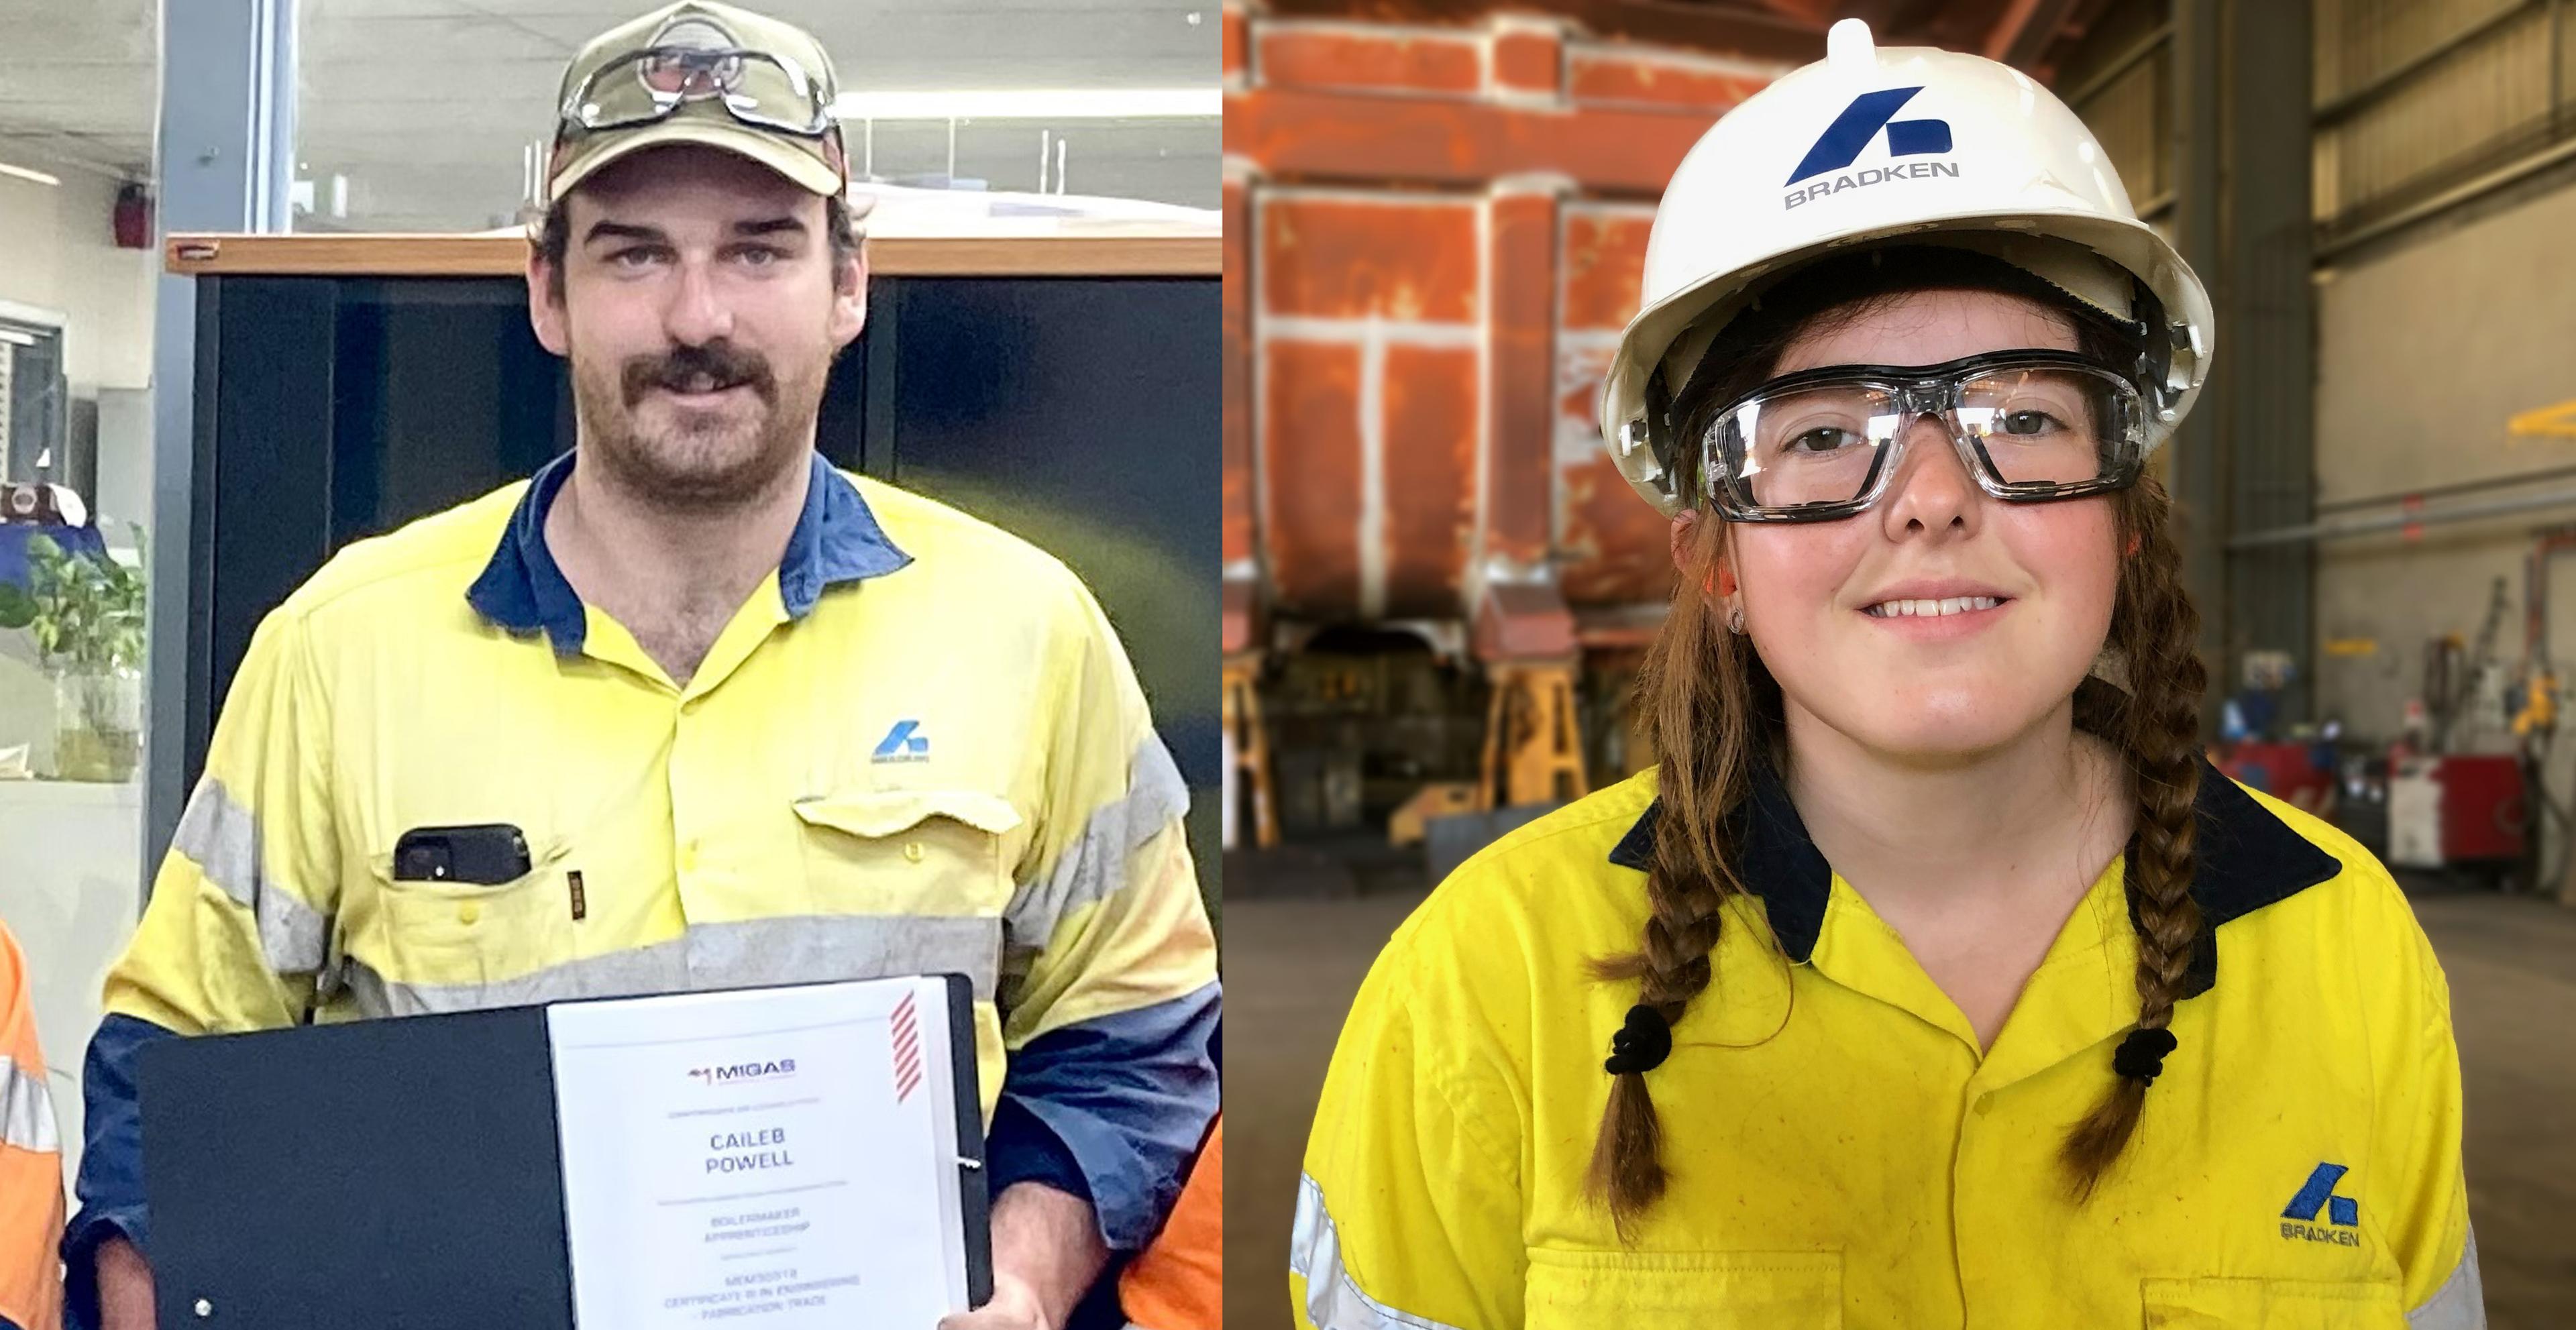 Two photos side-by-side, one of a man in a yellow hi-vis shirt with a Bradken logo holding a folder, and the other of a woman wearing a yellow hi-vis shirt and a white hard hat both with the Bradken logo on them